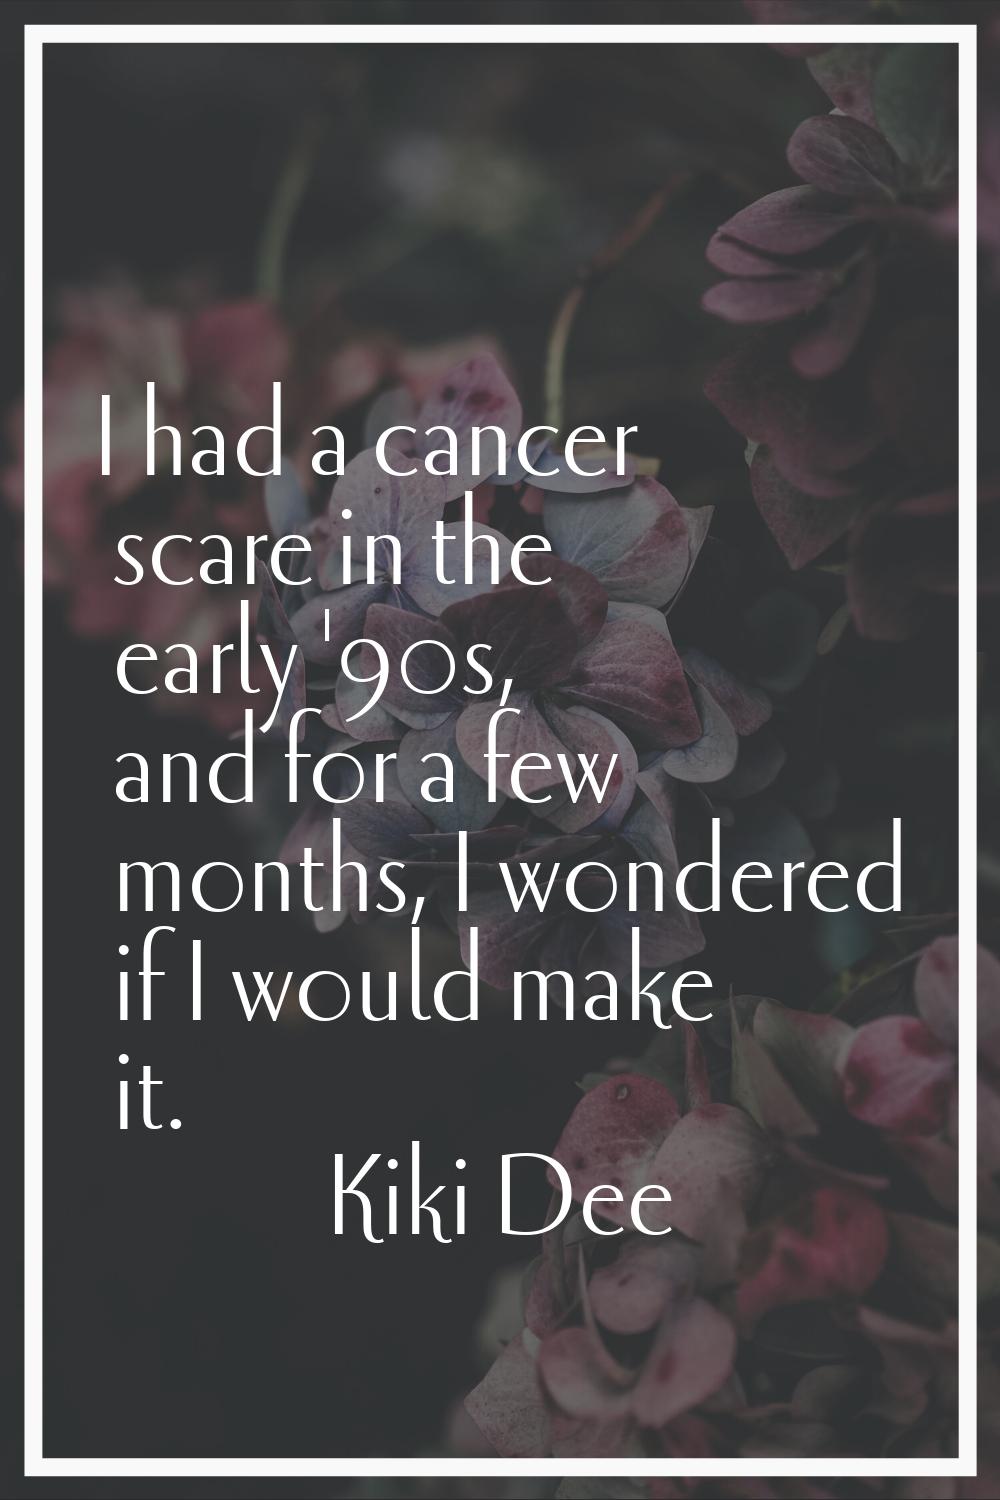 I had a cancer scare in the early '90s, and for a few months, I wondered if I would make it.